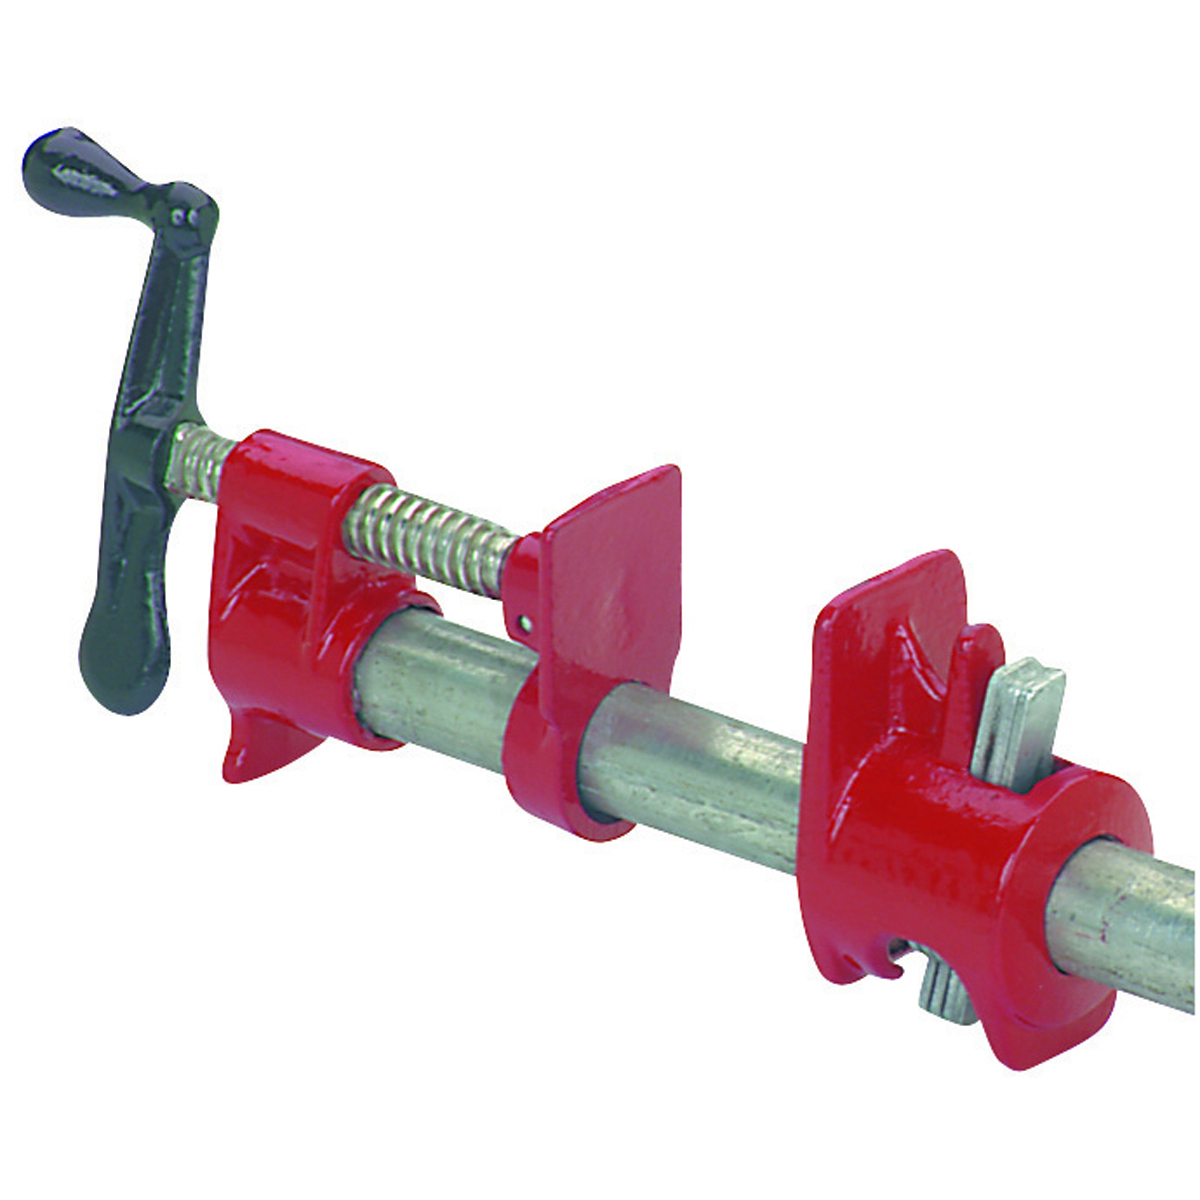 PITTSBURGH 3/4 In. Heavy Duty Cast Iron Pipe Clamp 2 Pc - Item 31255